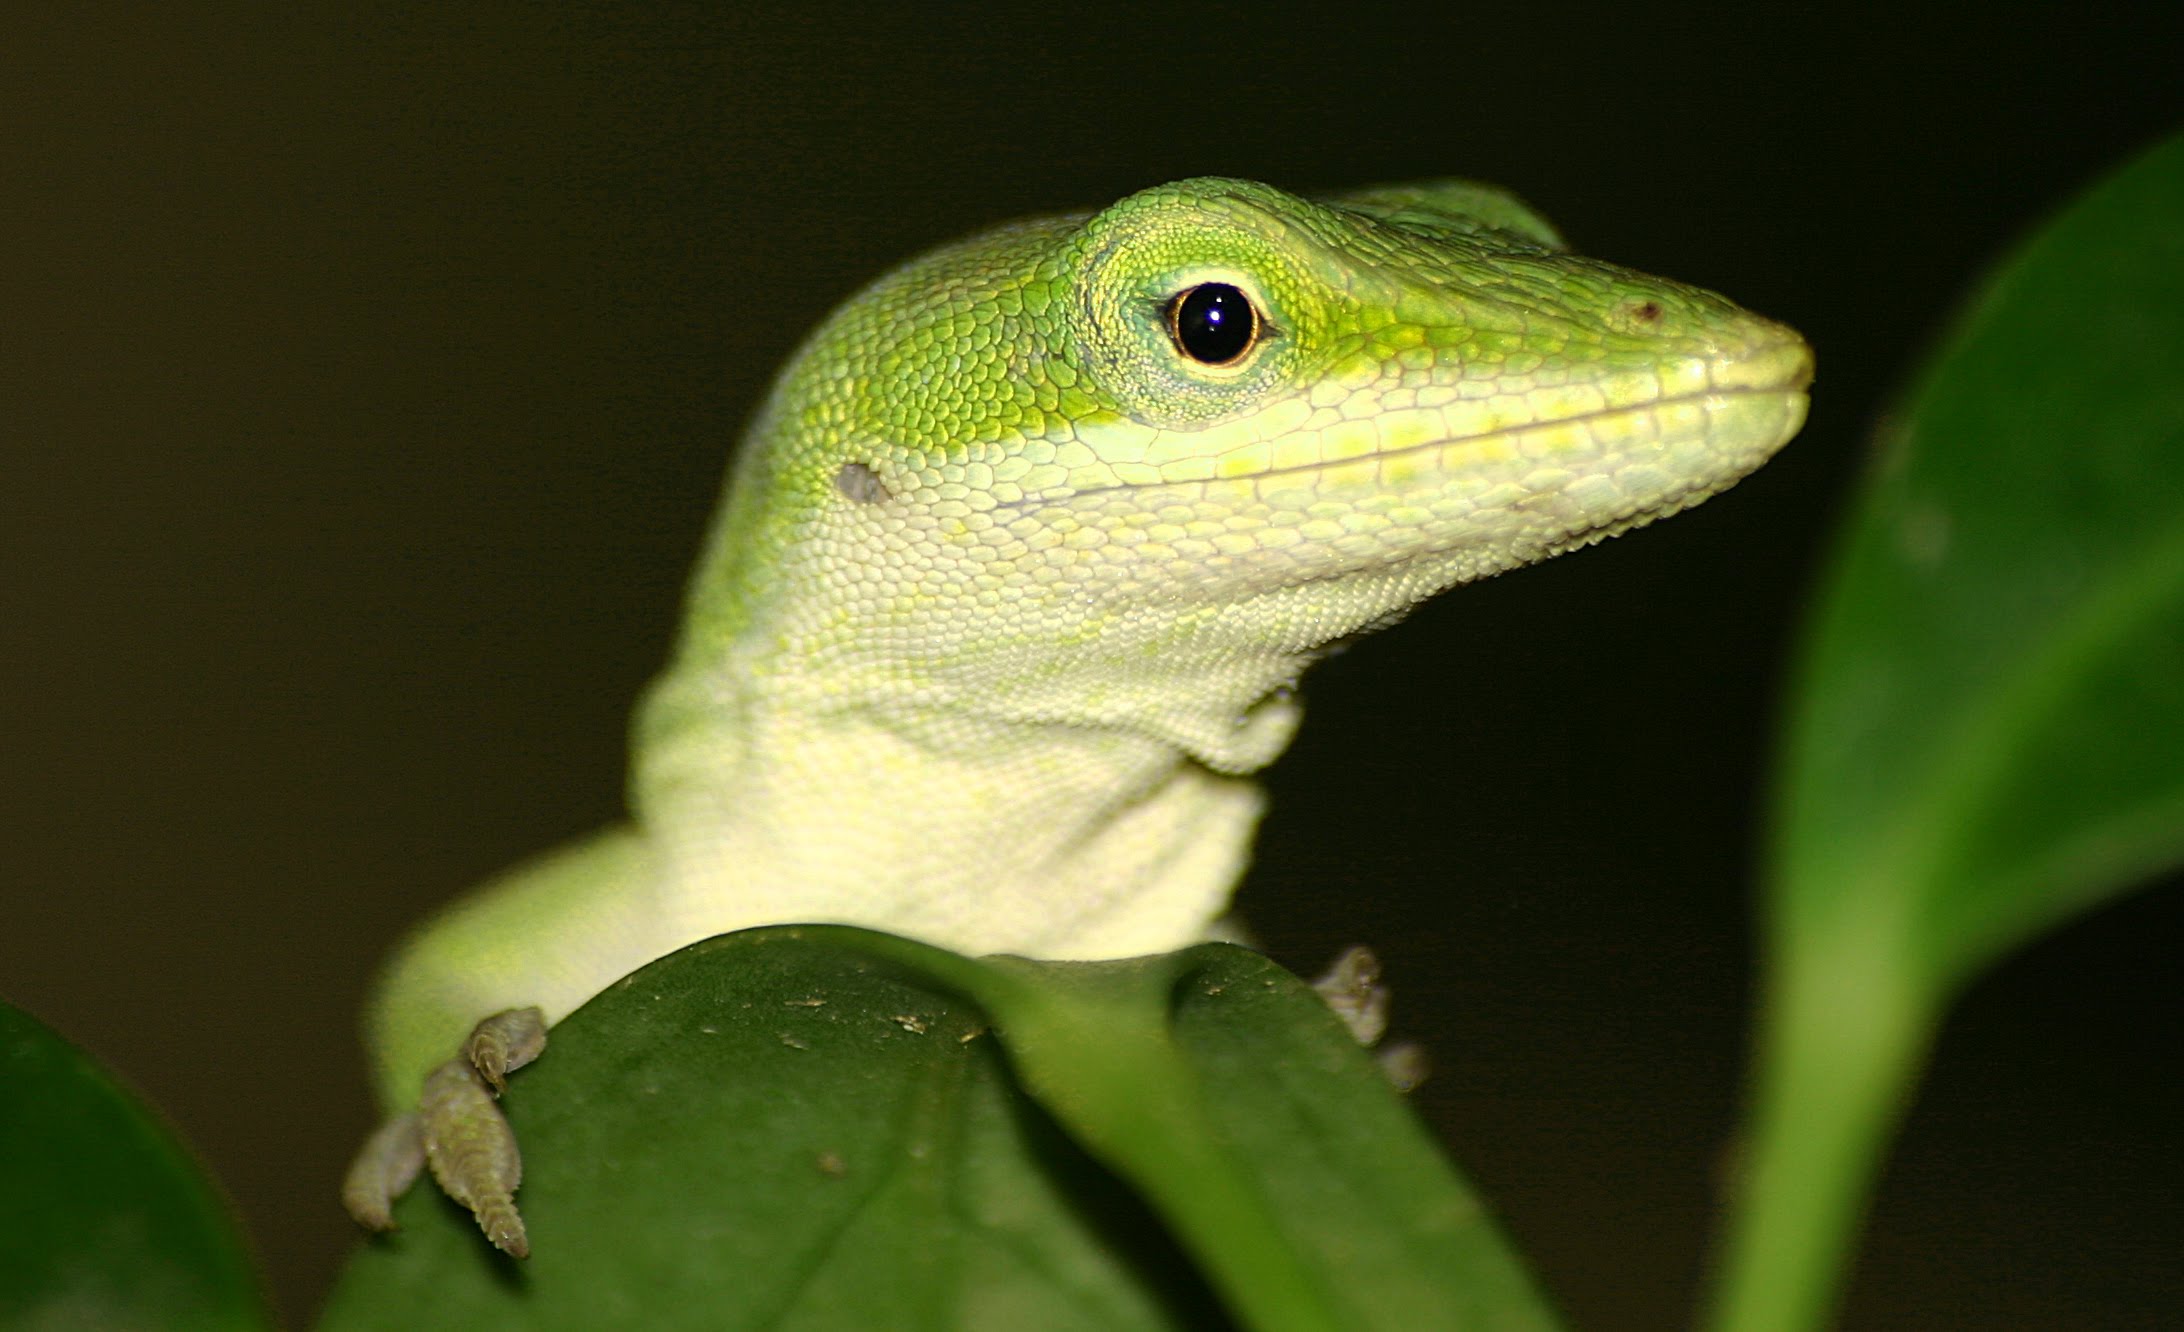 Anole wallpapers, Animal, HQ Anole pictures | 4K Wallpapers 2019